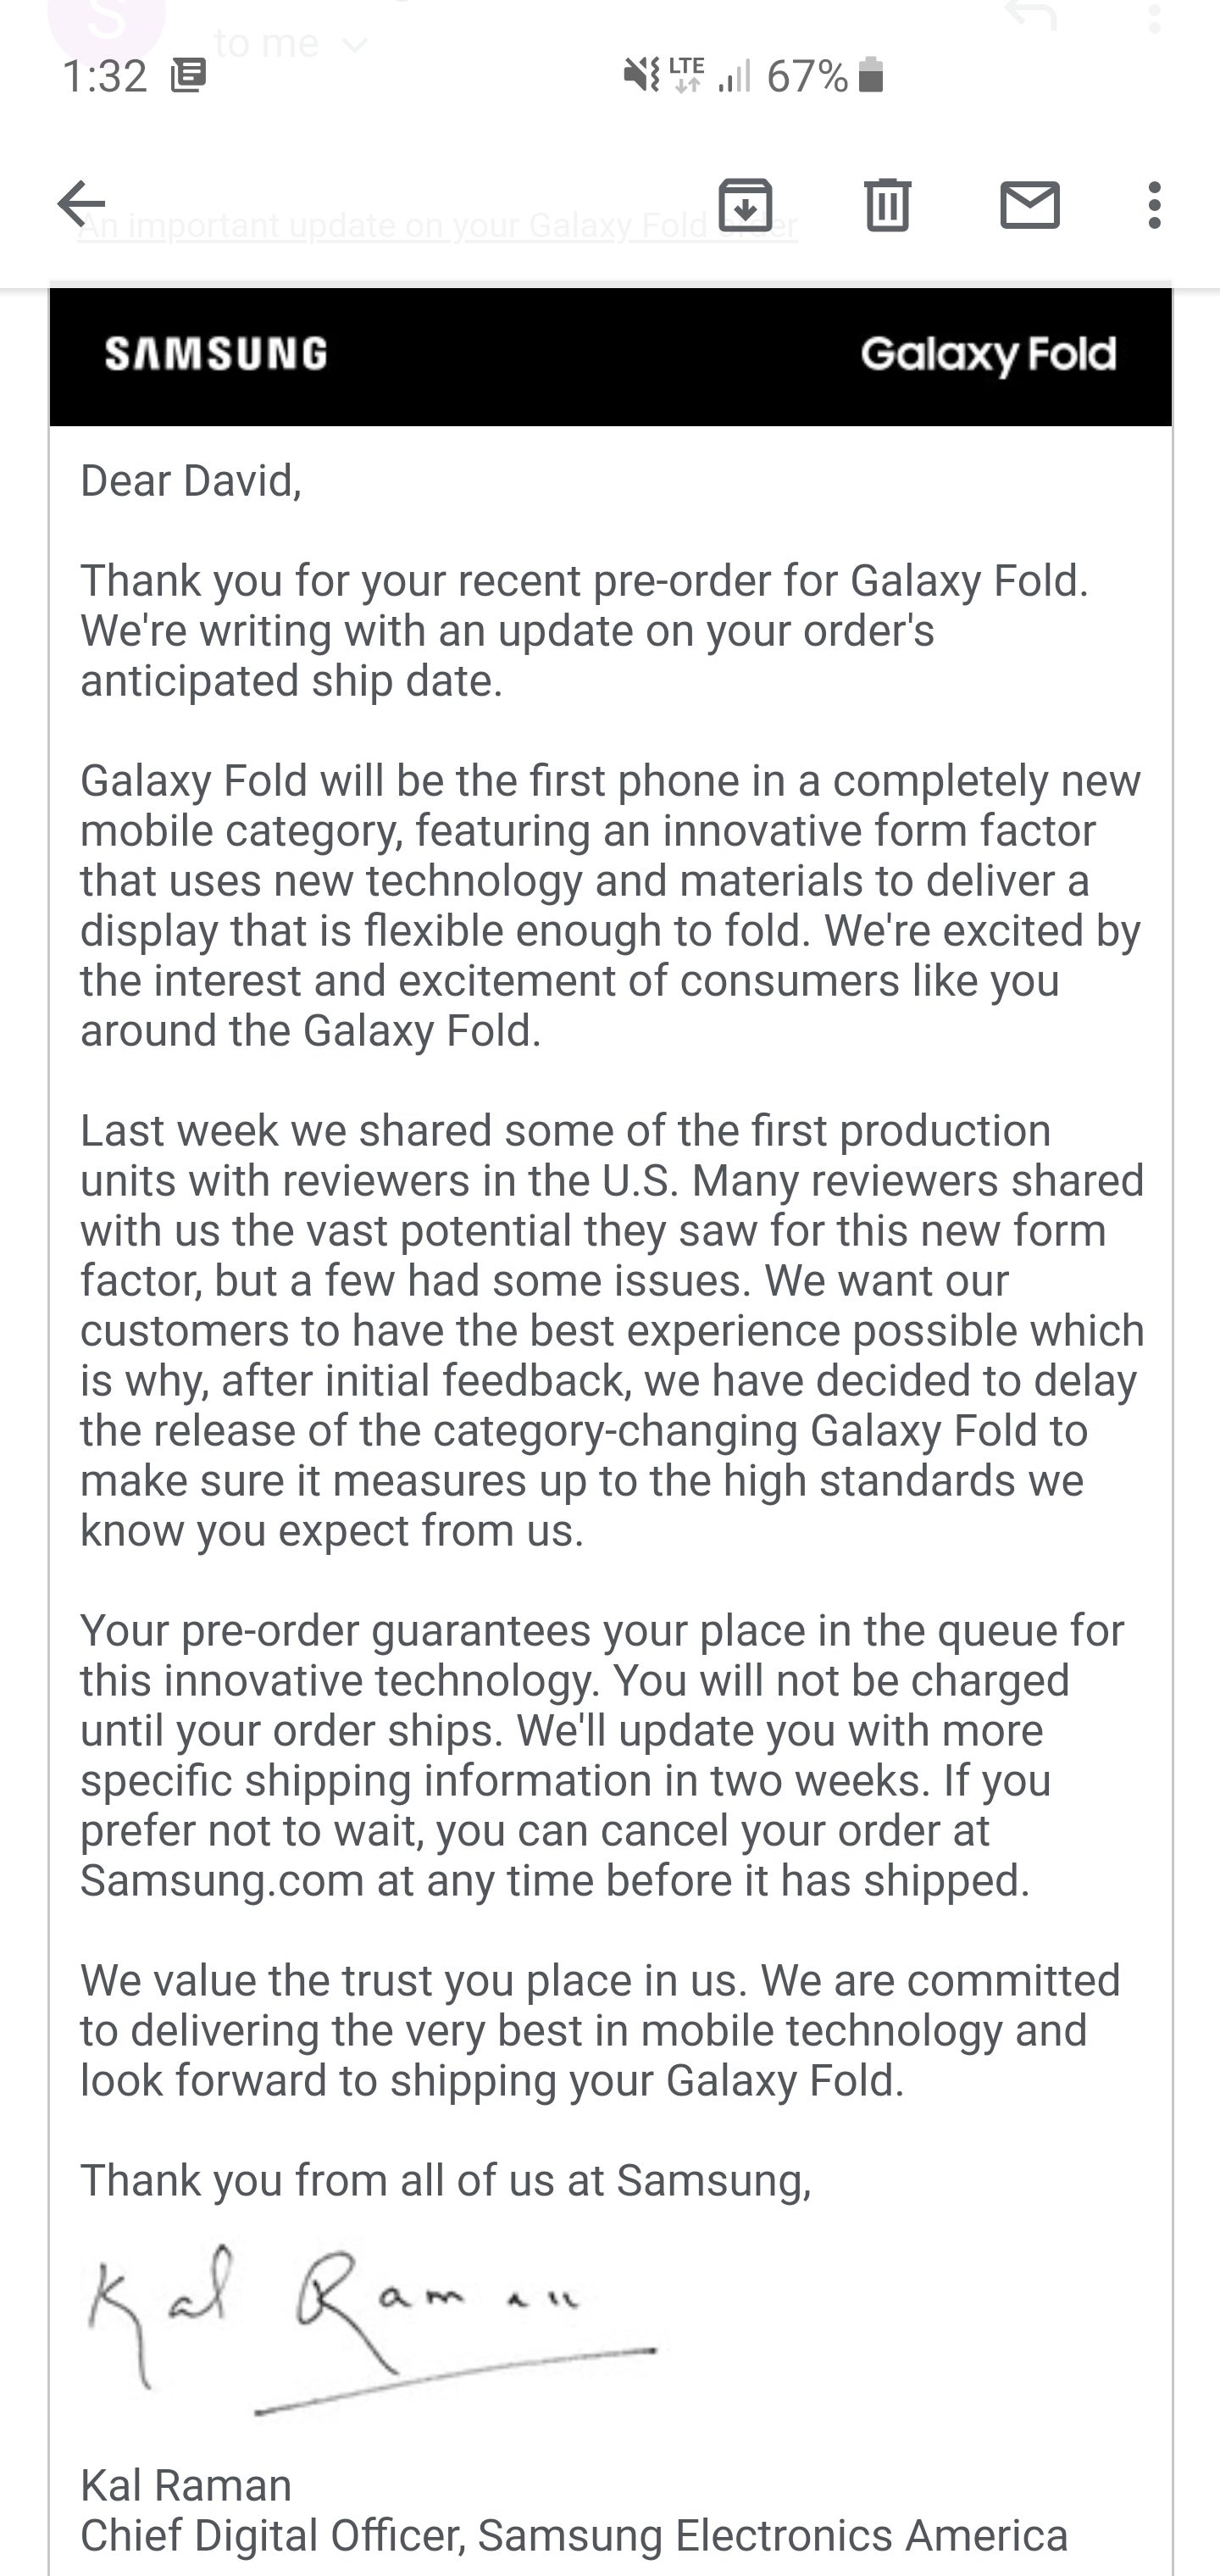 New Galaxy Fold release date coming in 'two weeks,' here's the pre-order delay notice to early adopters